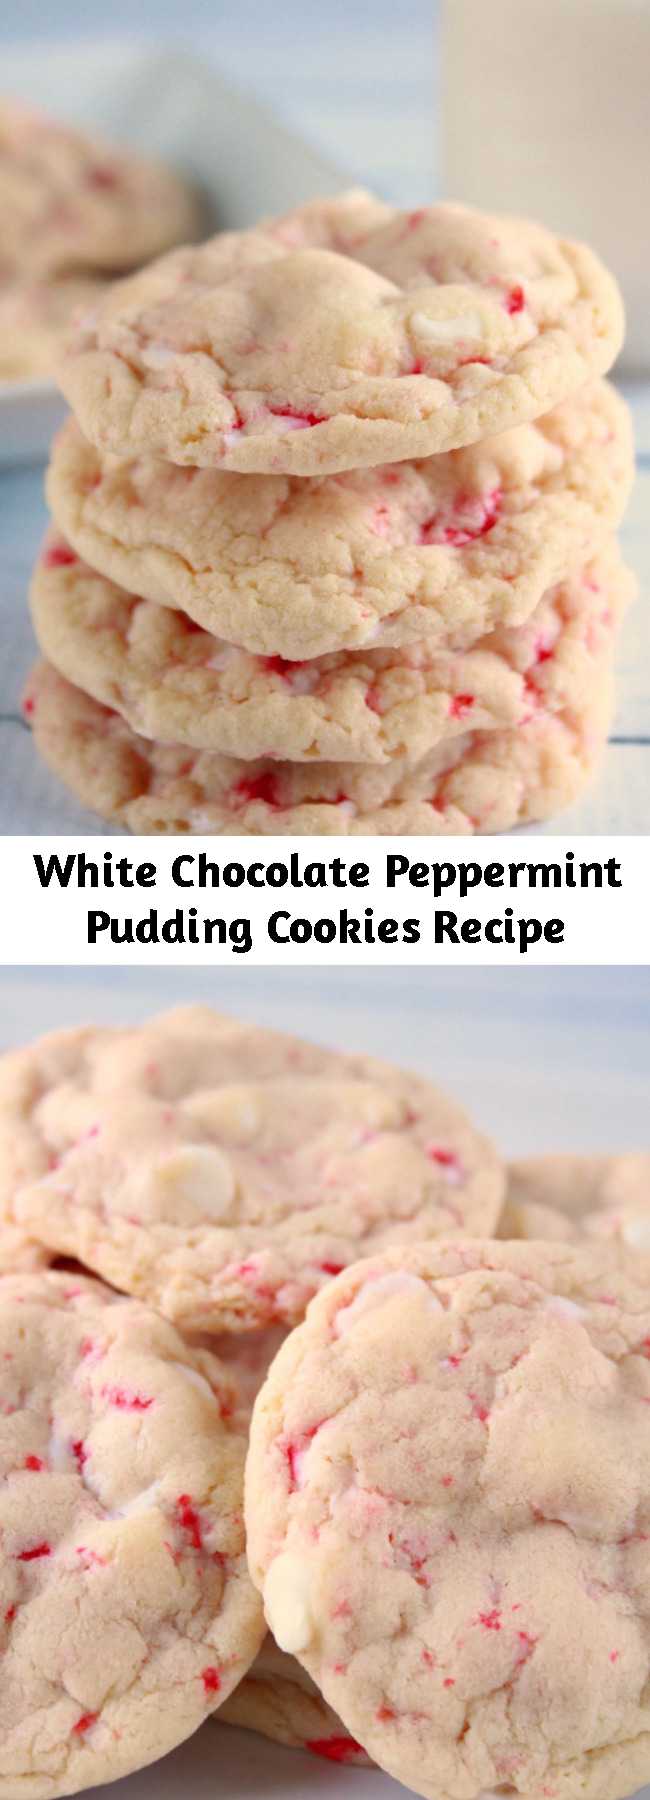 Easy White Chocolate Peppermint Pudding Cookies Recipe - These white chocolate peppermint pudding cookies are melt-in-your-mouth delicious! The combination of the white chocolate and peppermint is just so yummy.